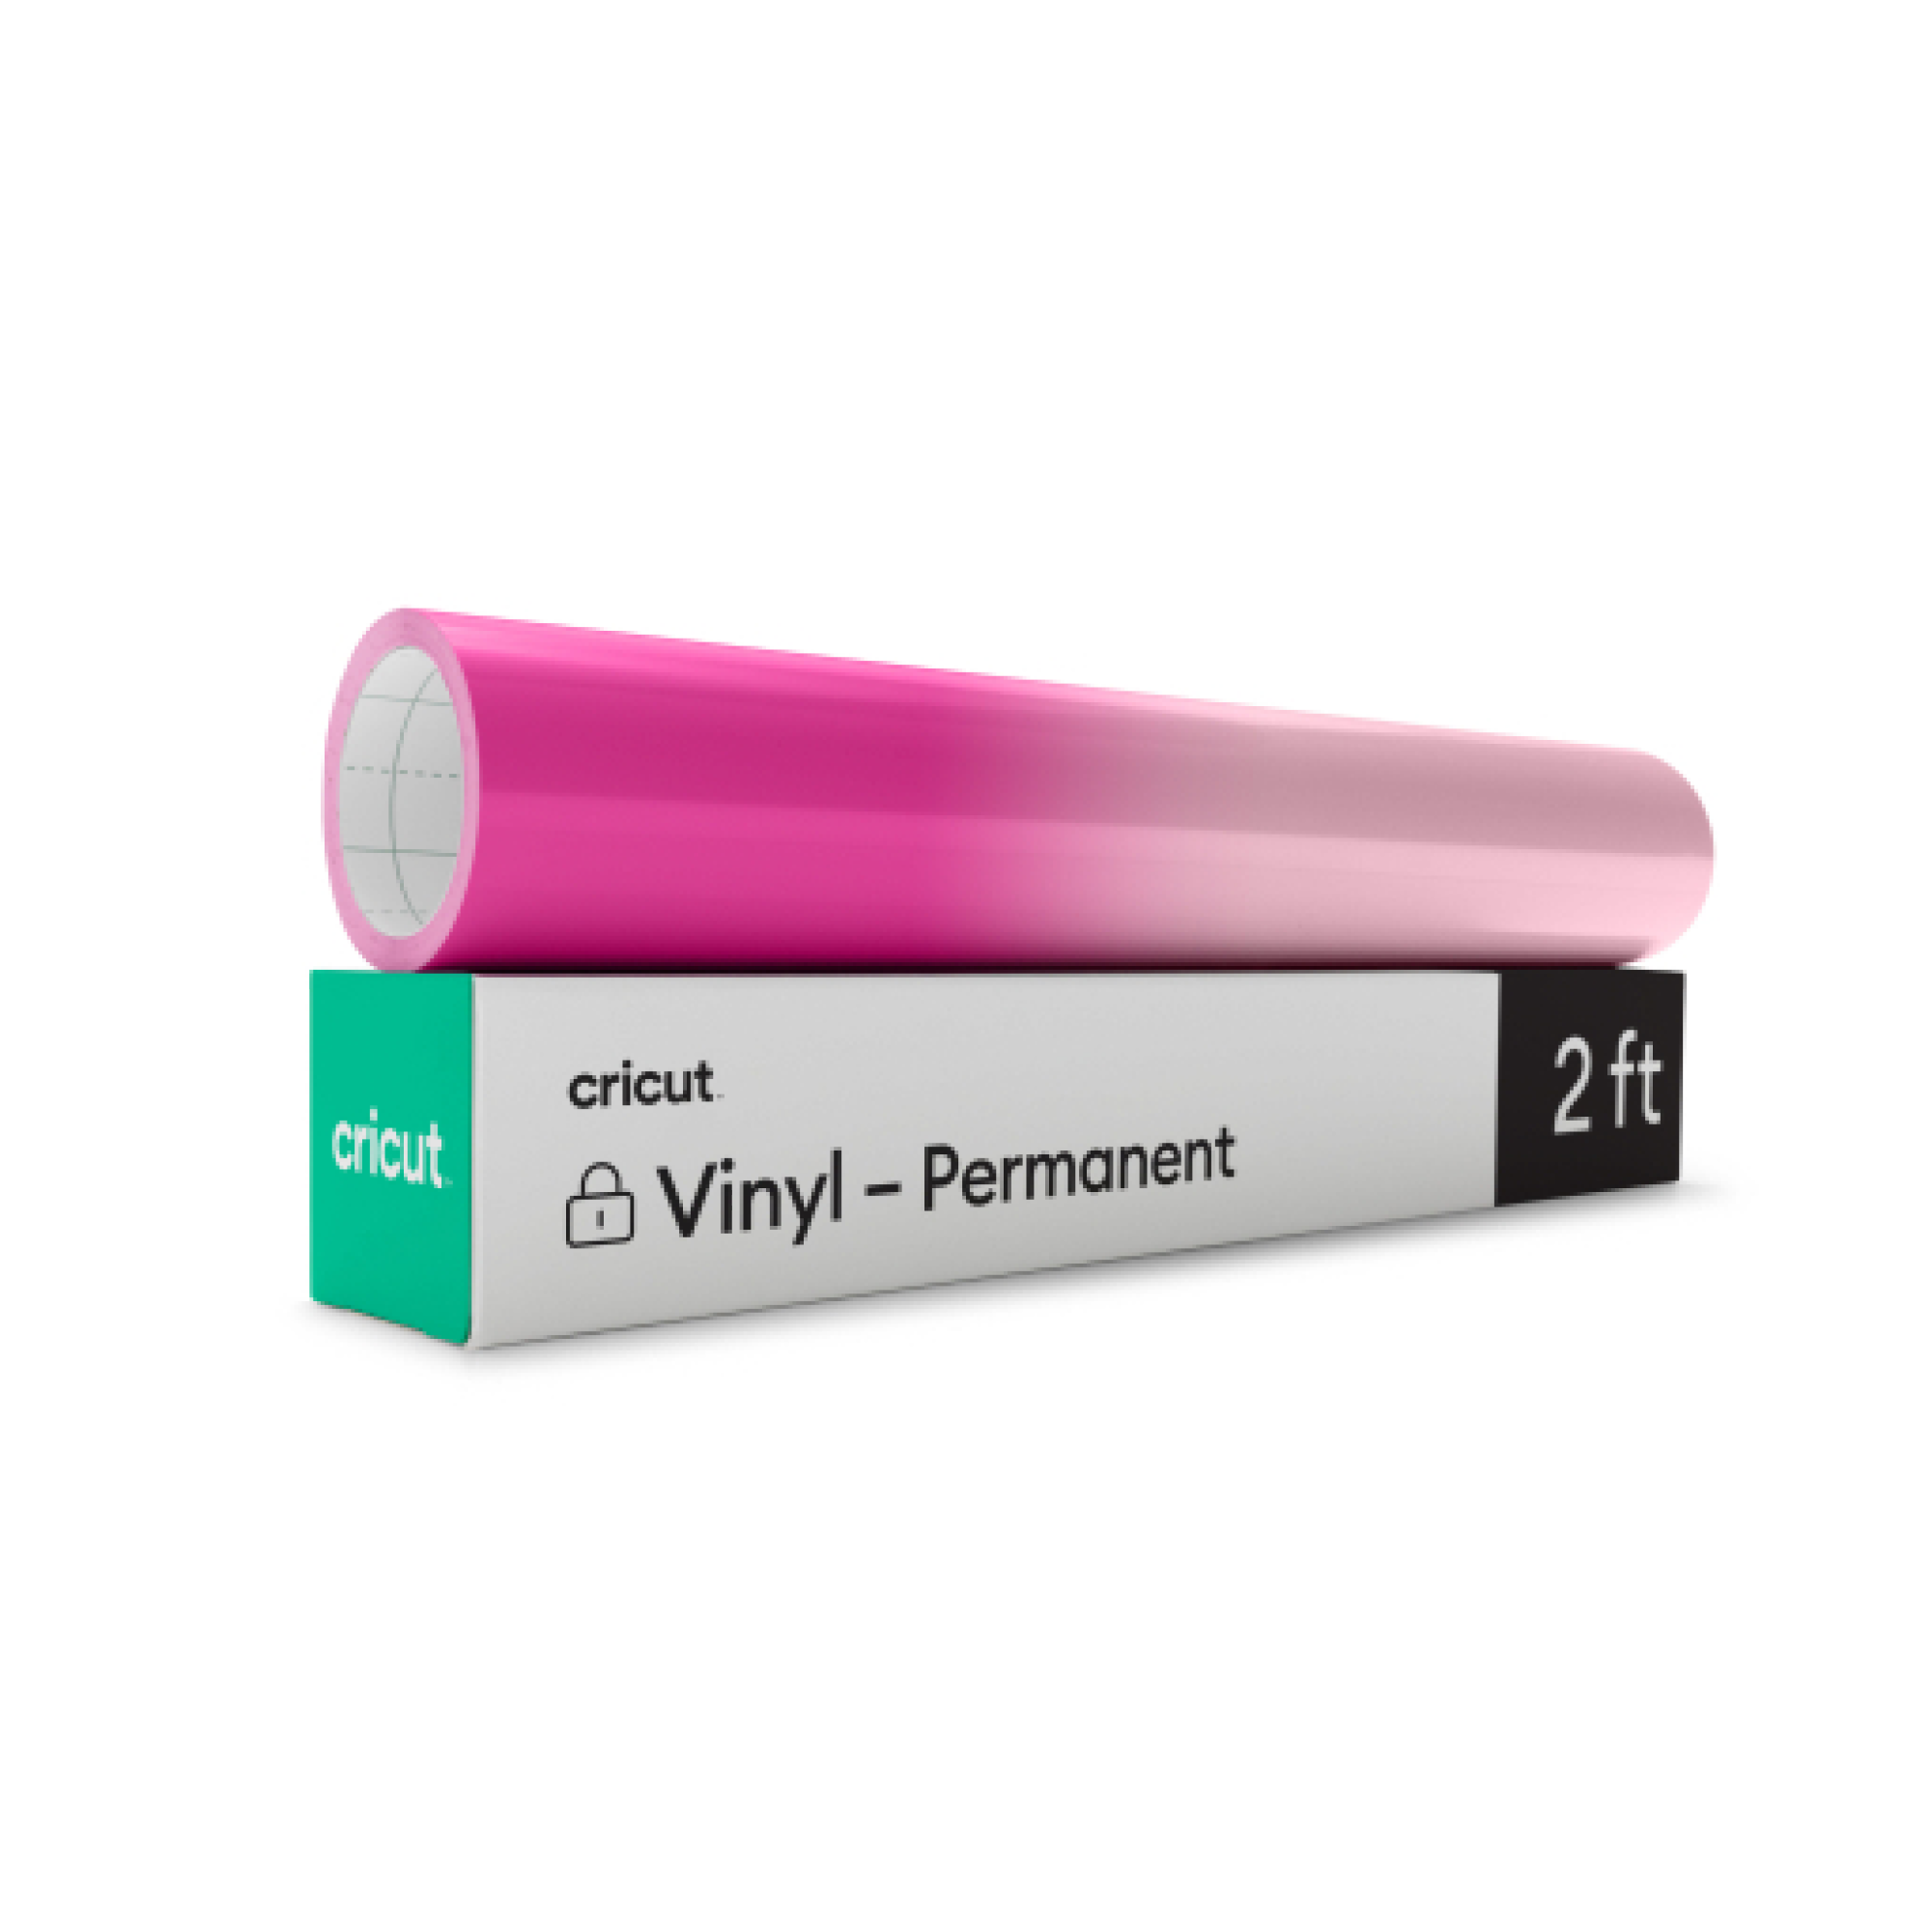  HYPERTAI Color Changing Vinyl Permanent Adhesive Vinyl for  Cricut, 9 Pack Hot Color Changing Vinyl Permanent,Adhesive 4 Colors 12 x  12 Vinyl Sheets +5 Transfer Tape Sheets : Arts, Crafts & Sewing